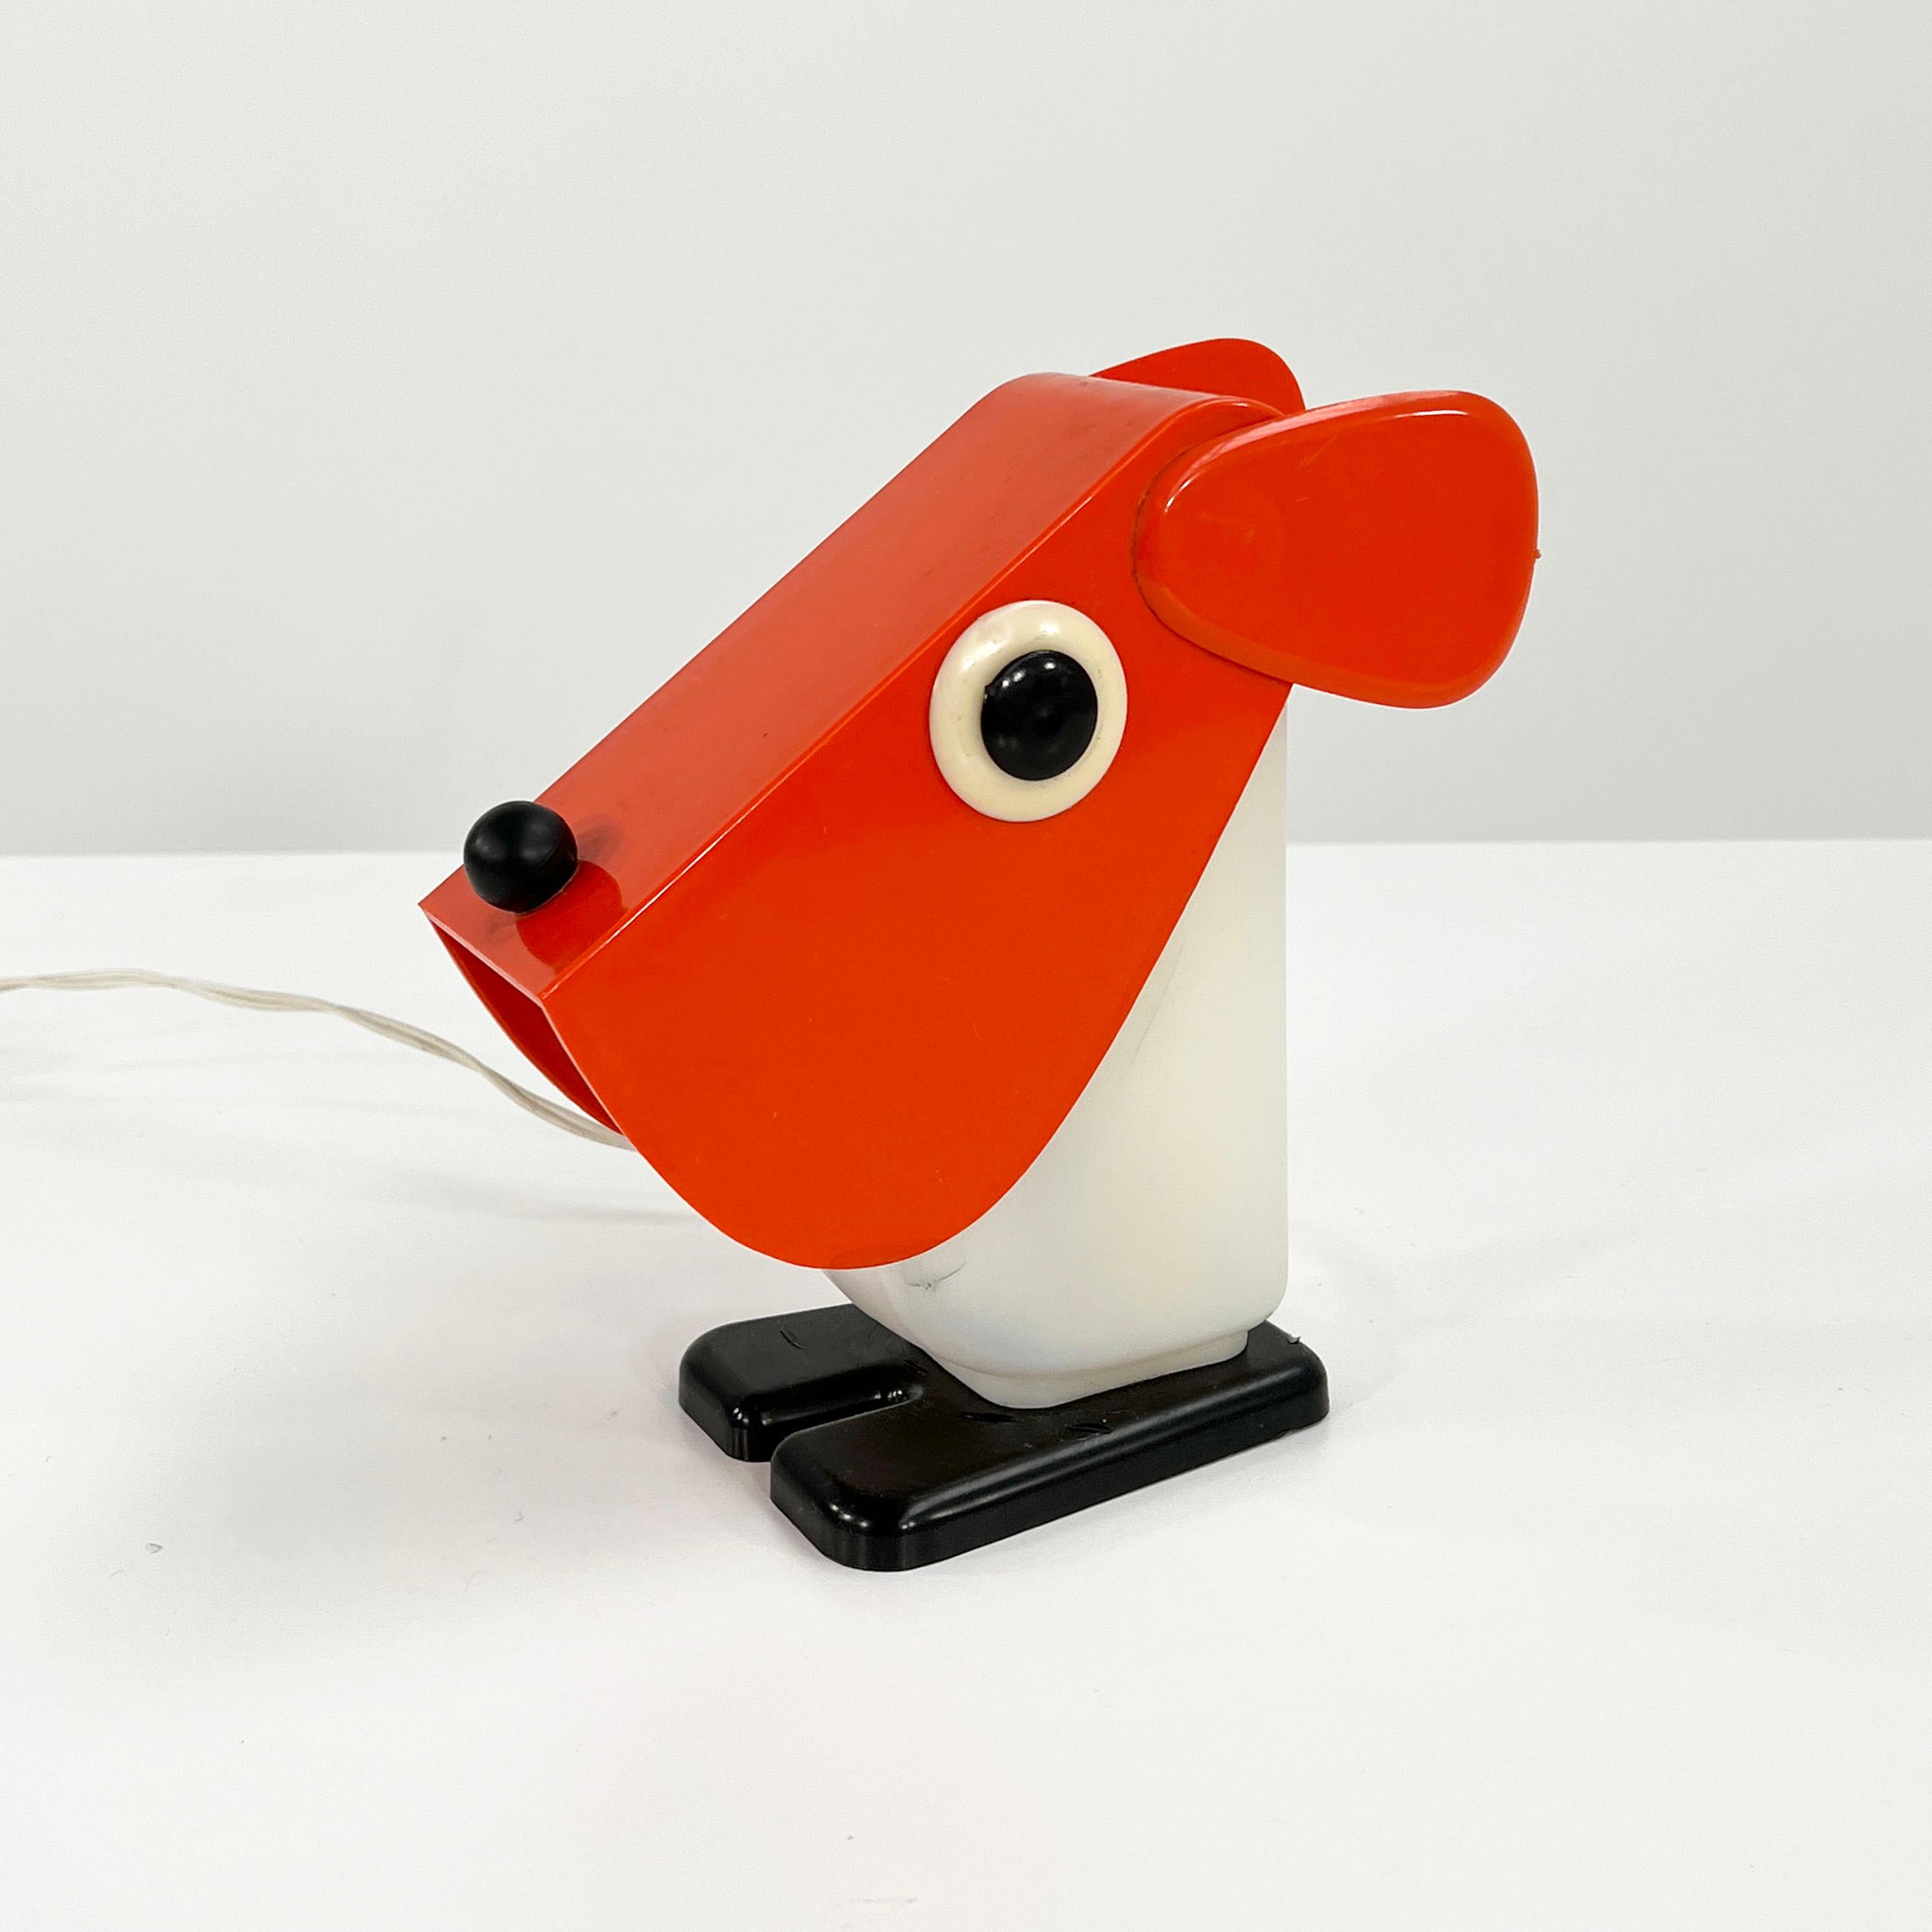 Mid-Century Modern Dog Table Lamp by Fernando Cassetta for Tacman, 1970s